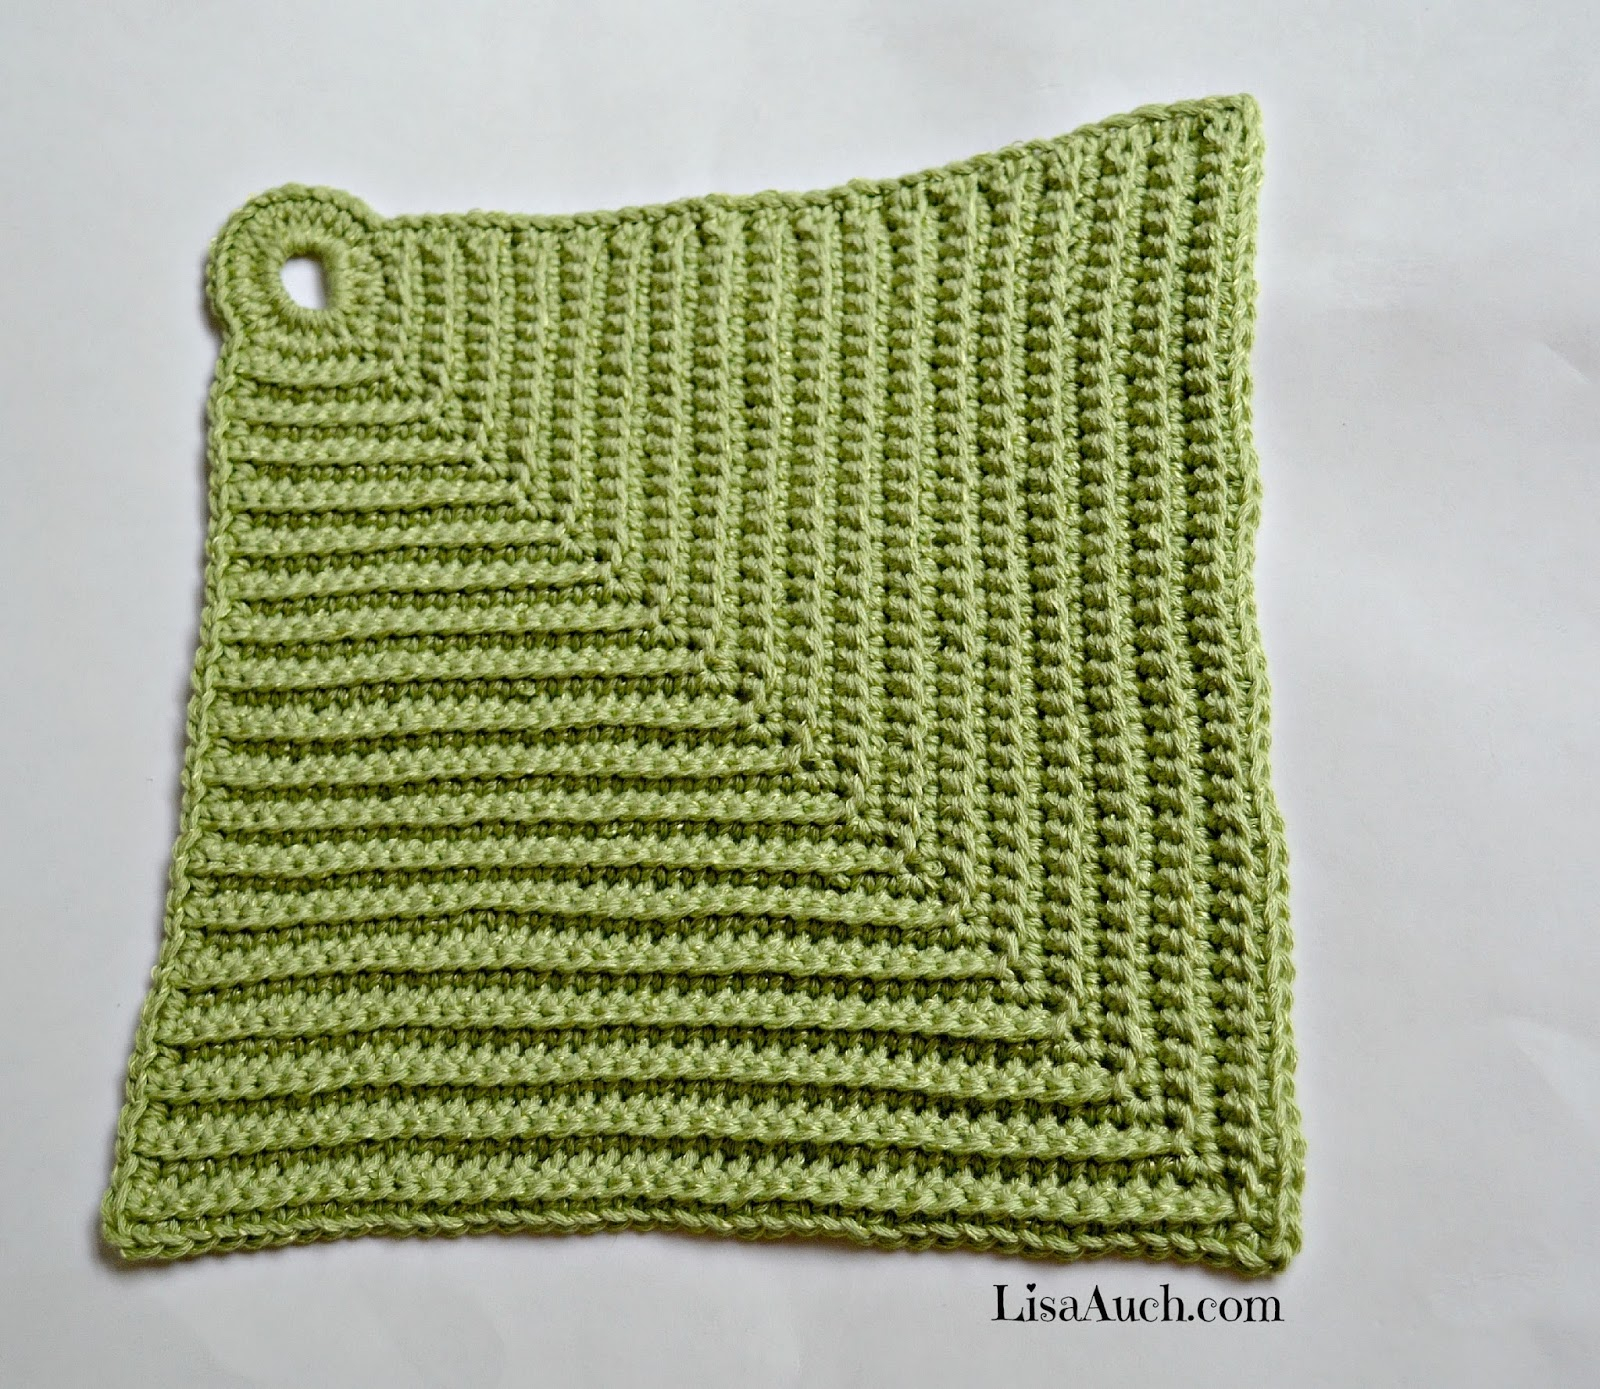 Crochet Washcloth Pattern Free Free Crochet Patterns And Designs Lisaauch Free Easy Crochet